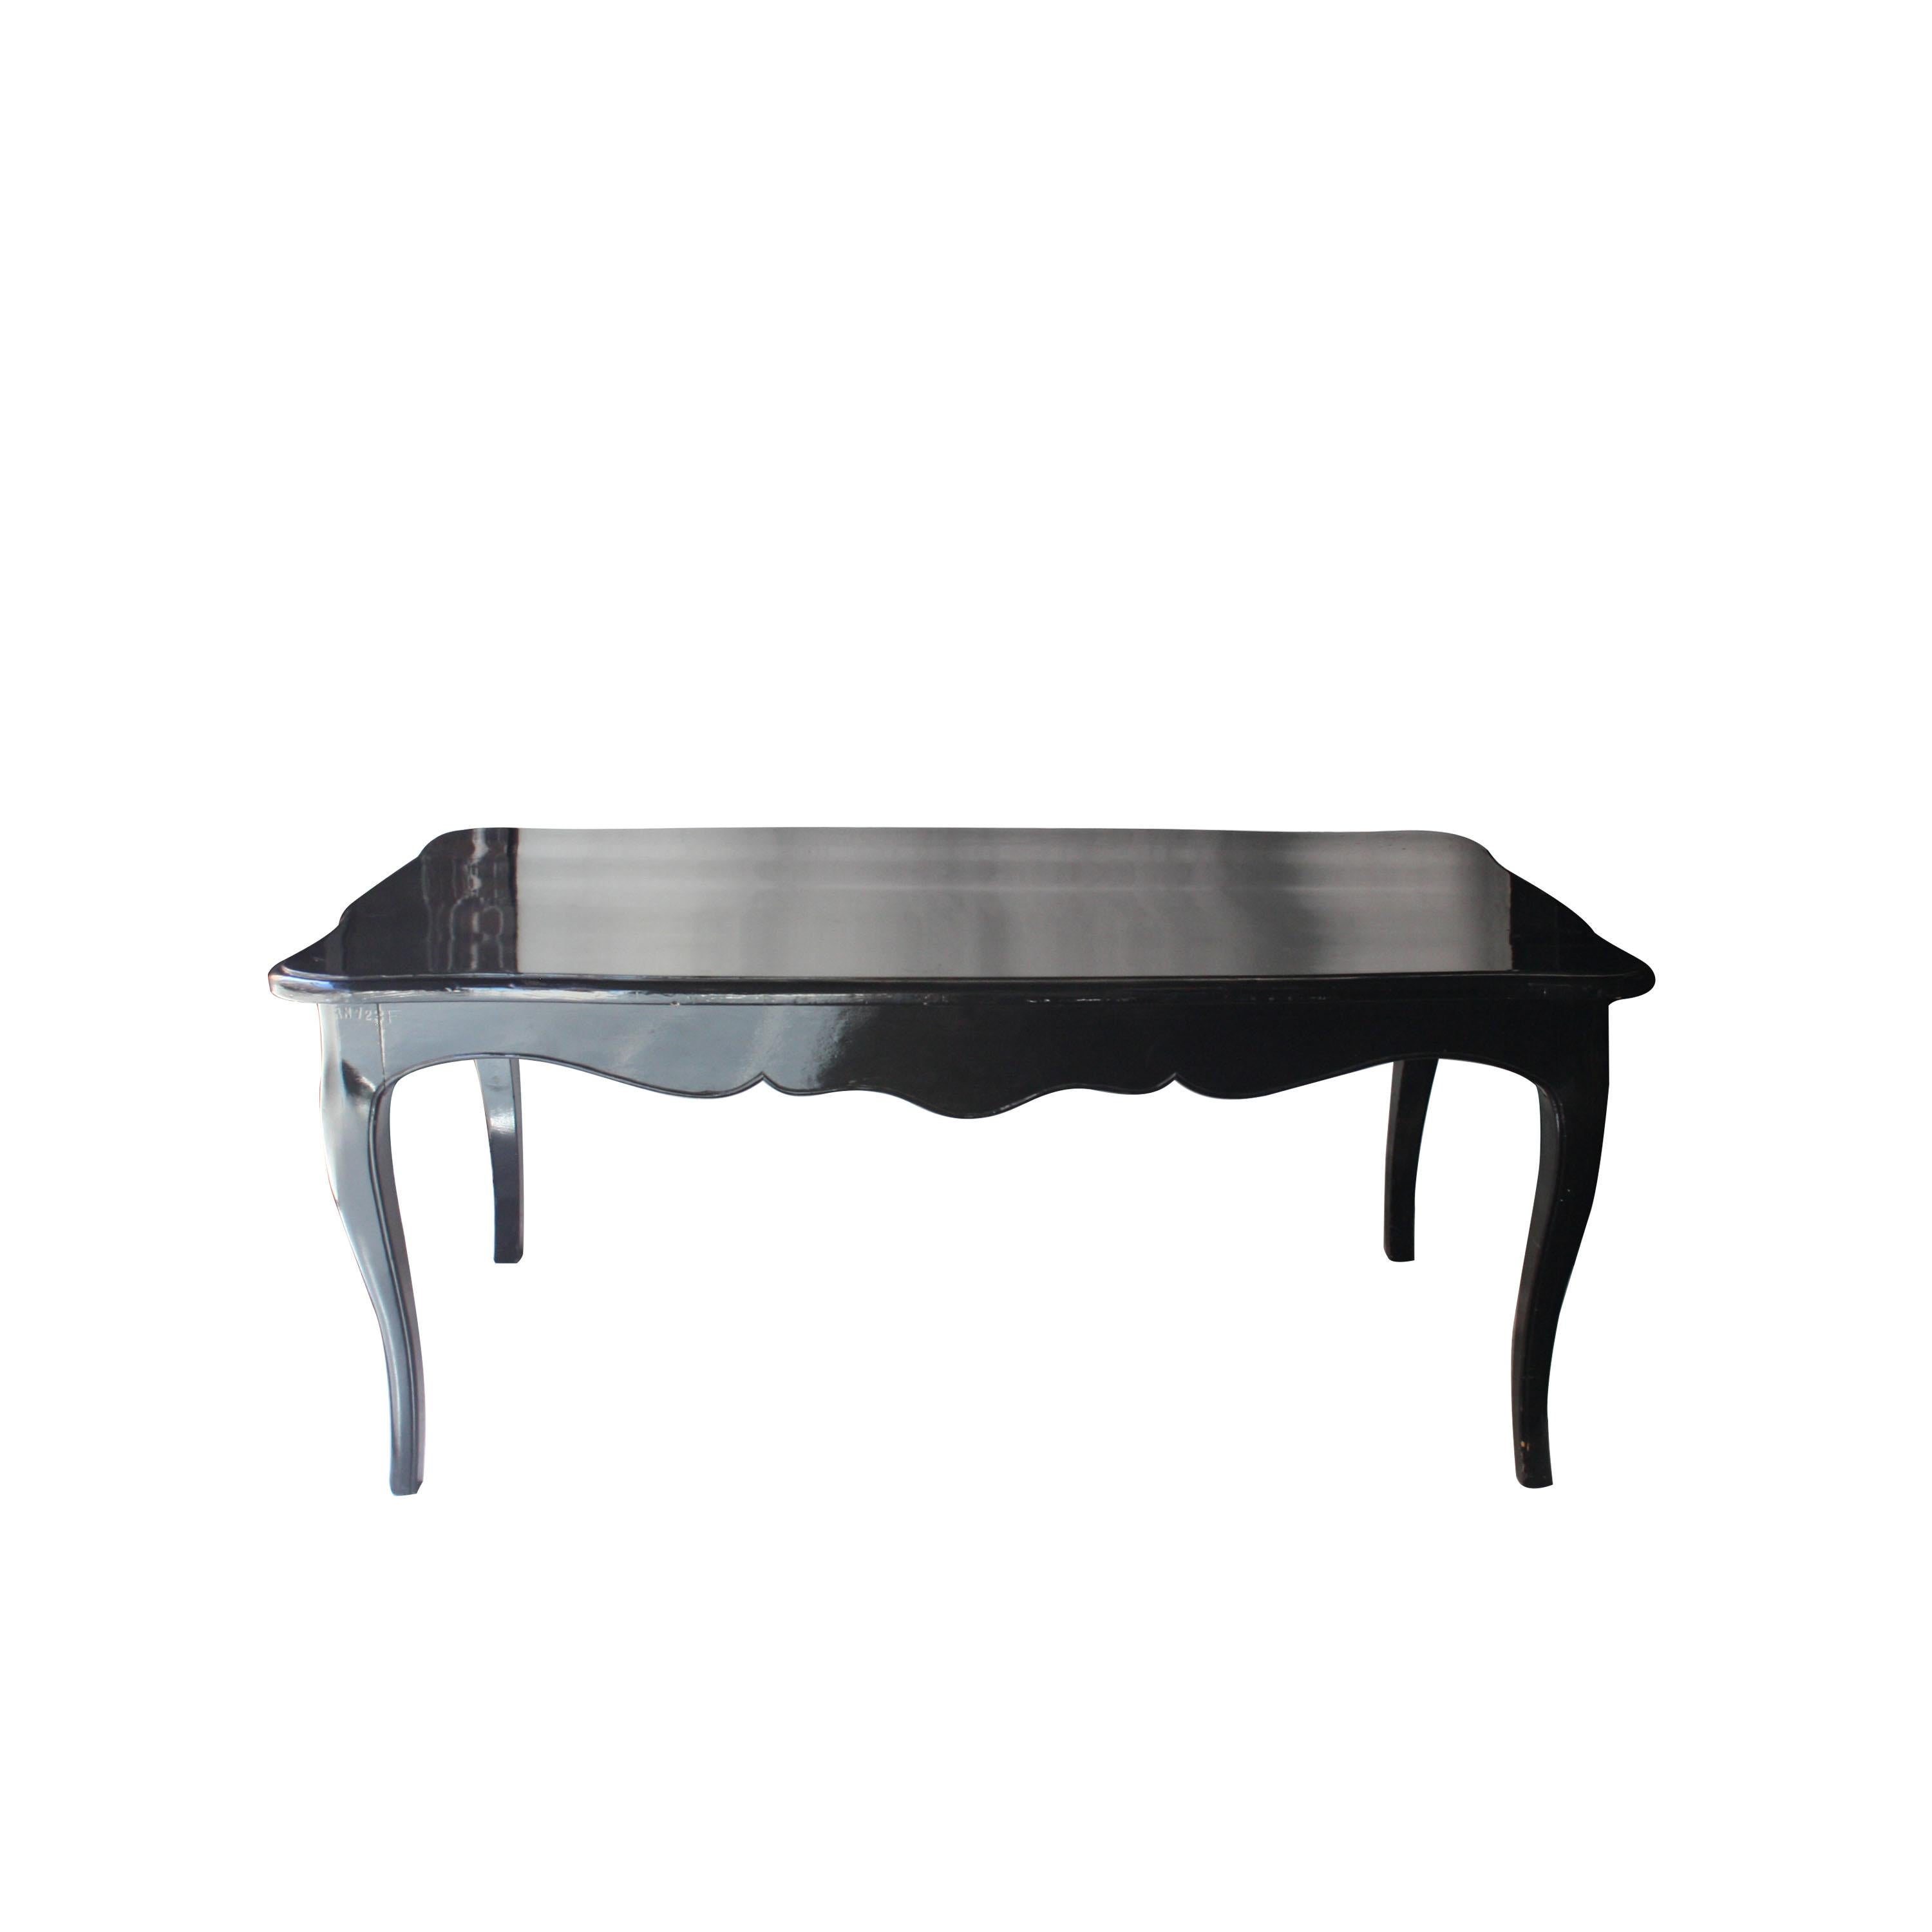 Dining table with solid oak structure lacquered in high gloss black.